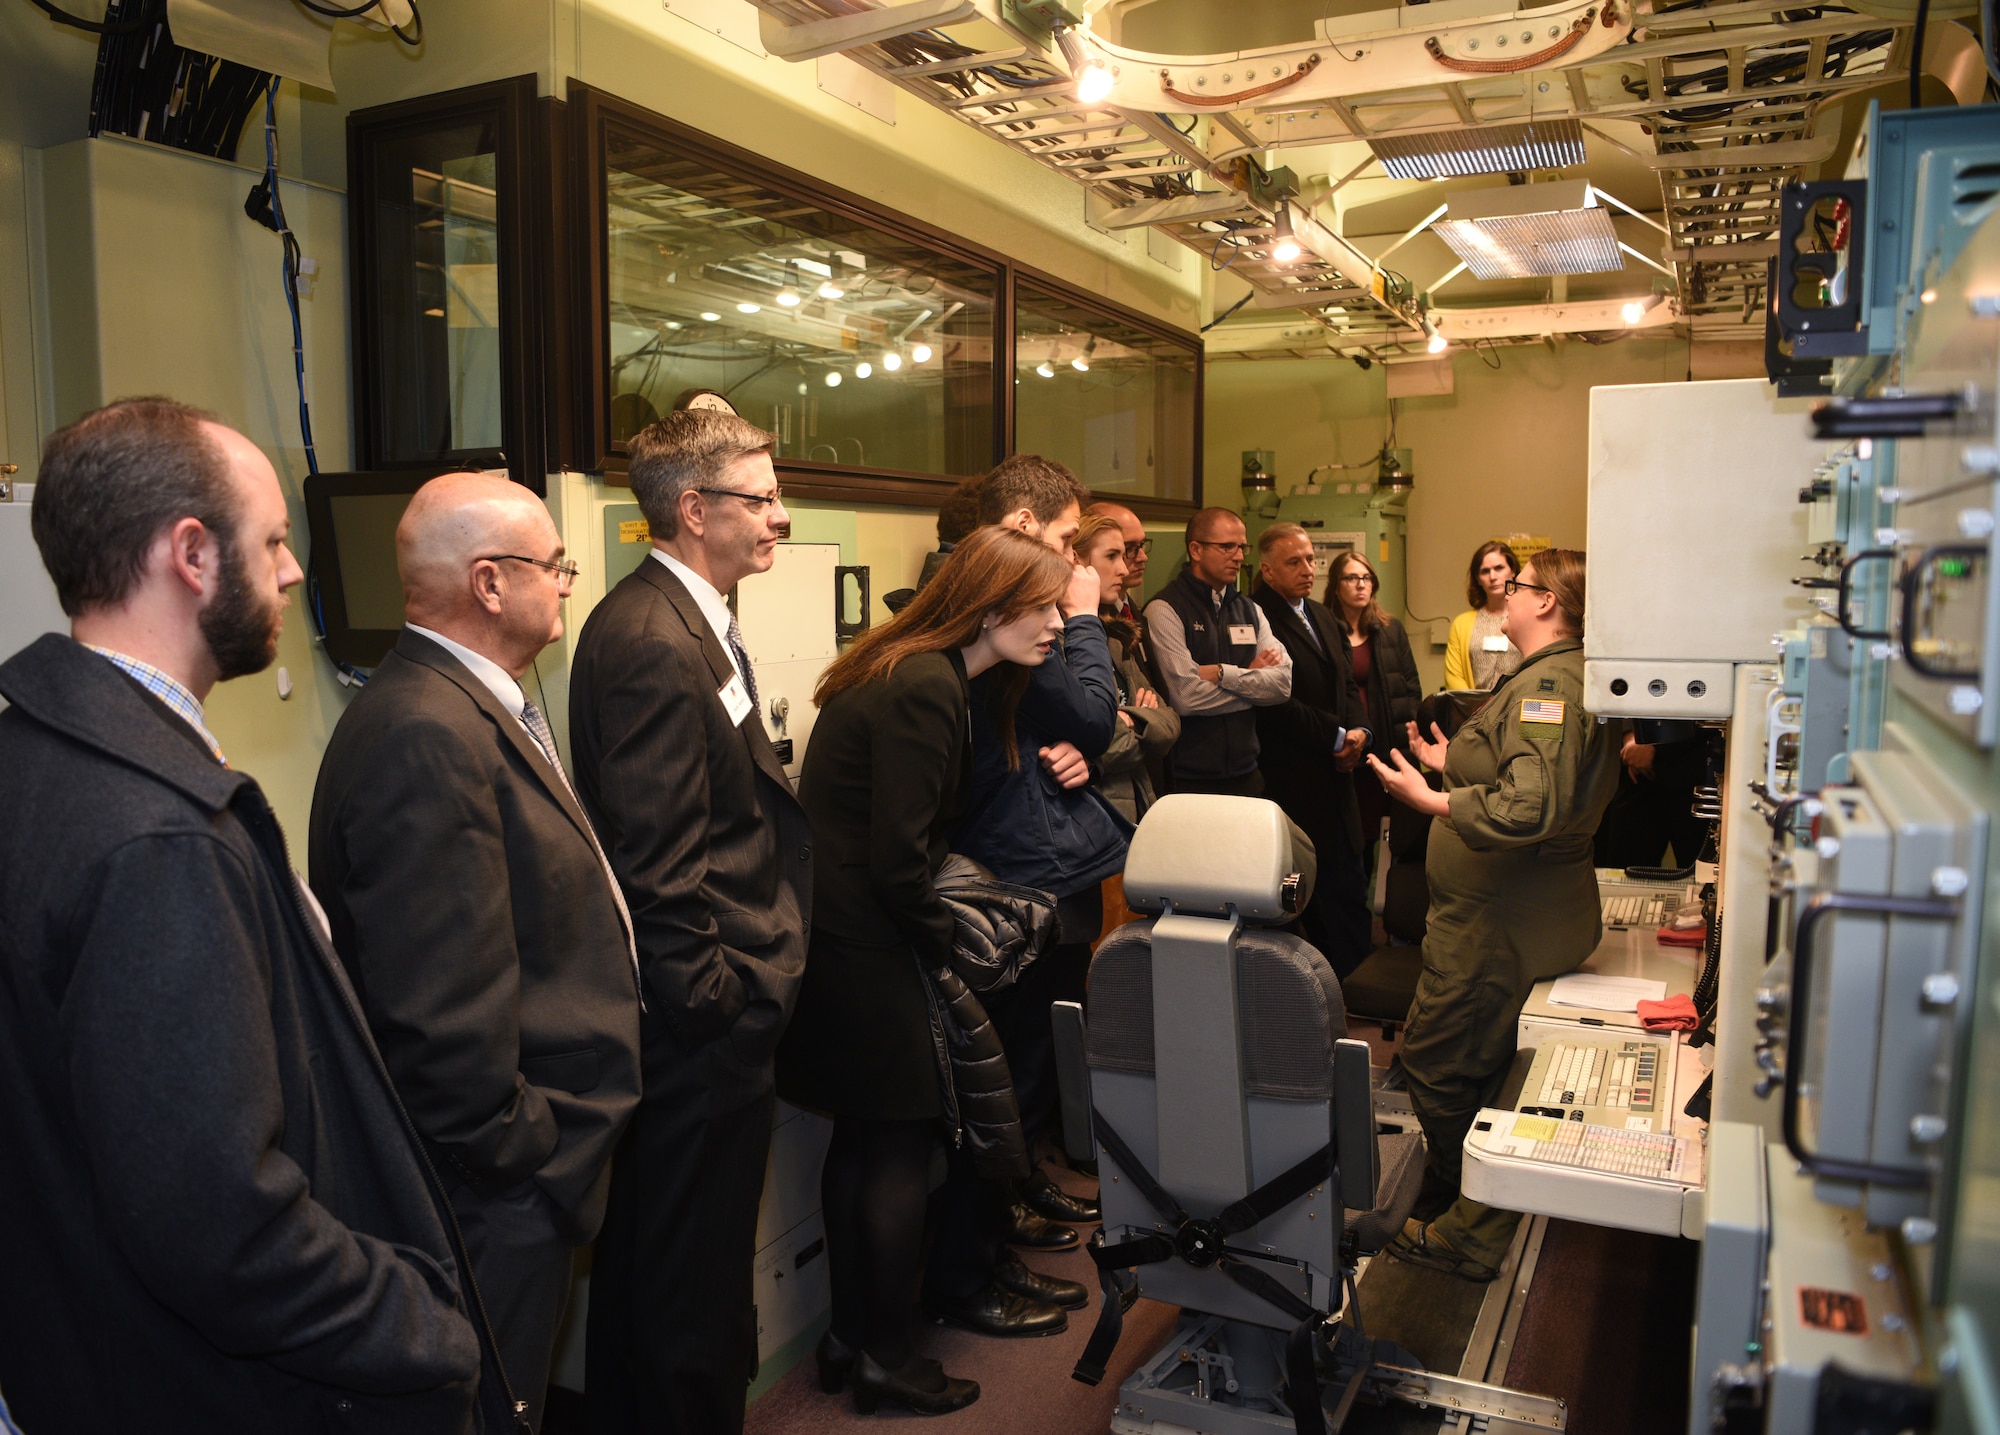 Capt. Amanda Schuyler from the 90th Operations Support Squadron, explains the Missile Procedures Trainers to a visiting group from the local chapter of the American Inns of Court during a tour on base Nov. 7, 2019, on F. E. Warren Air Force Base, Wyo. Members of the Inns of Court included justices from the state supreme court, law professors from the University of Wyoming, and local attorneys. The tour was intended to promote stronger relationships between the base legal professionals and their local civilian counterparts. (U.S. Air Force photo by Glenn S. Robertson).